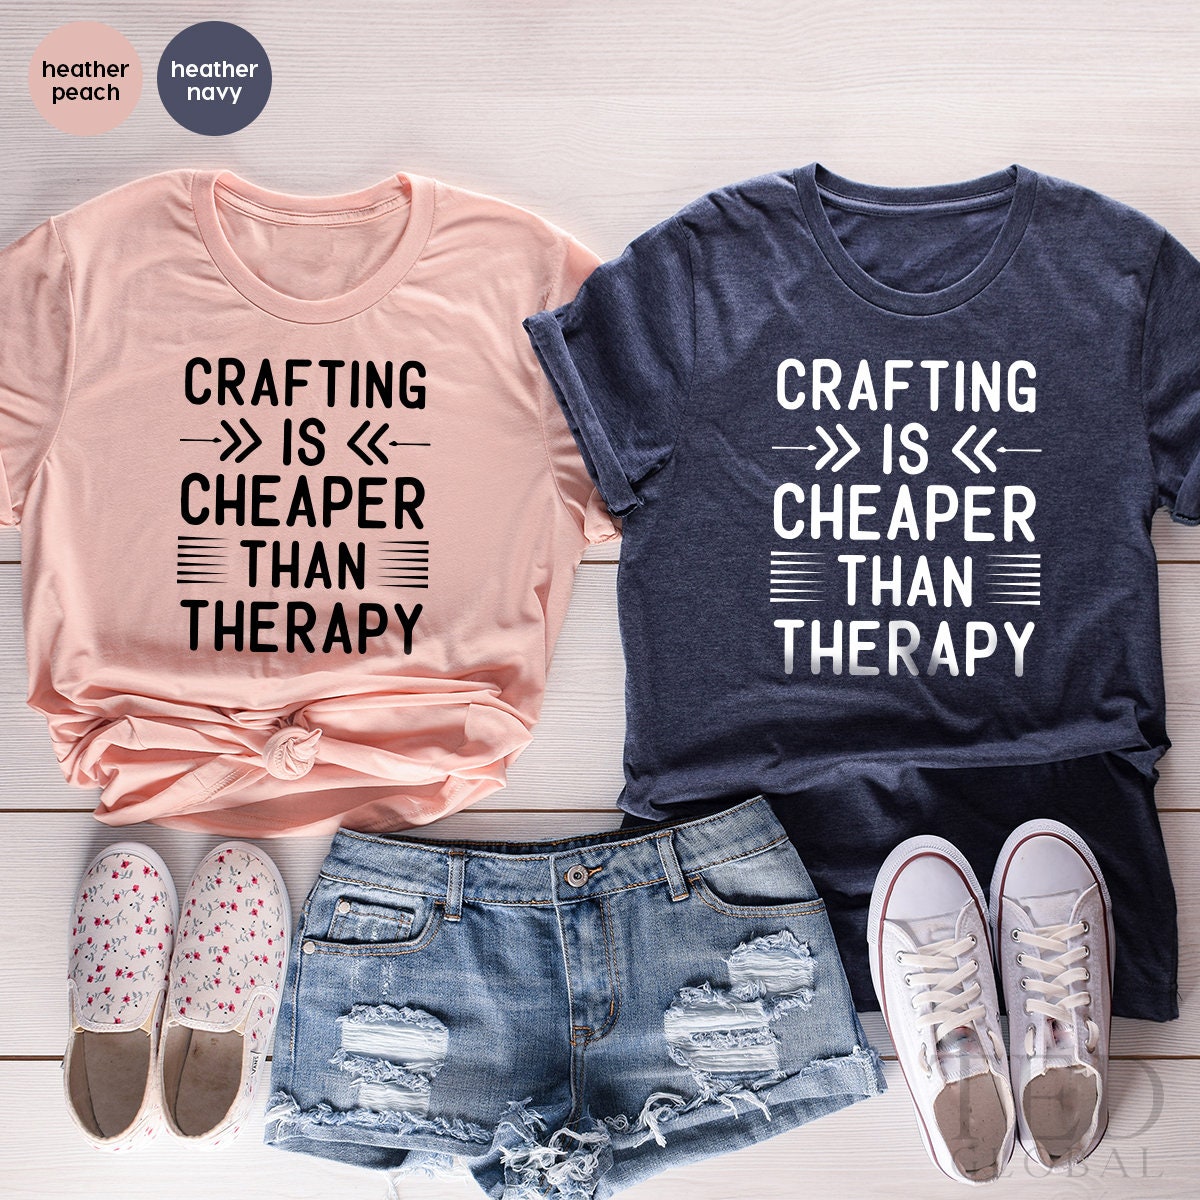 Crafting T-Shirt, Funny Craft Tshirt, Cute Hobby T Shirt, Shirt for Crafter, Gift for Artist, Art Teacher Tees, Creating Graphic Tees